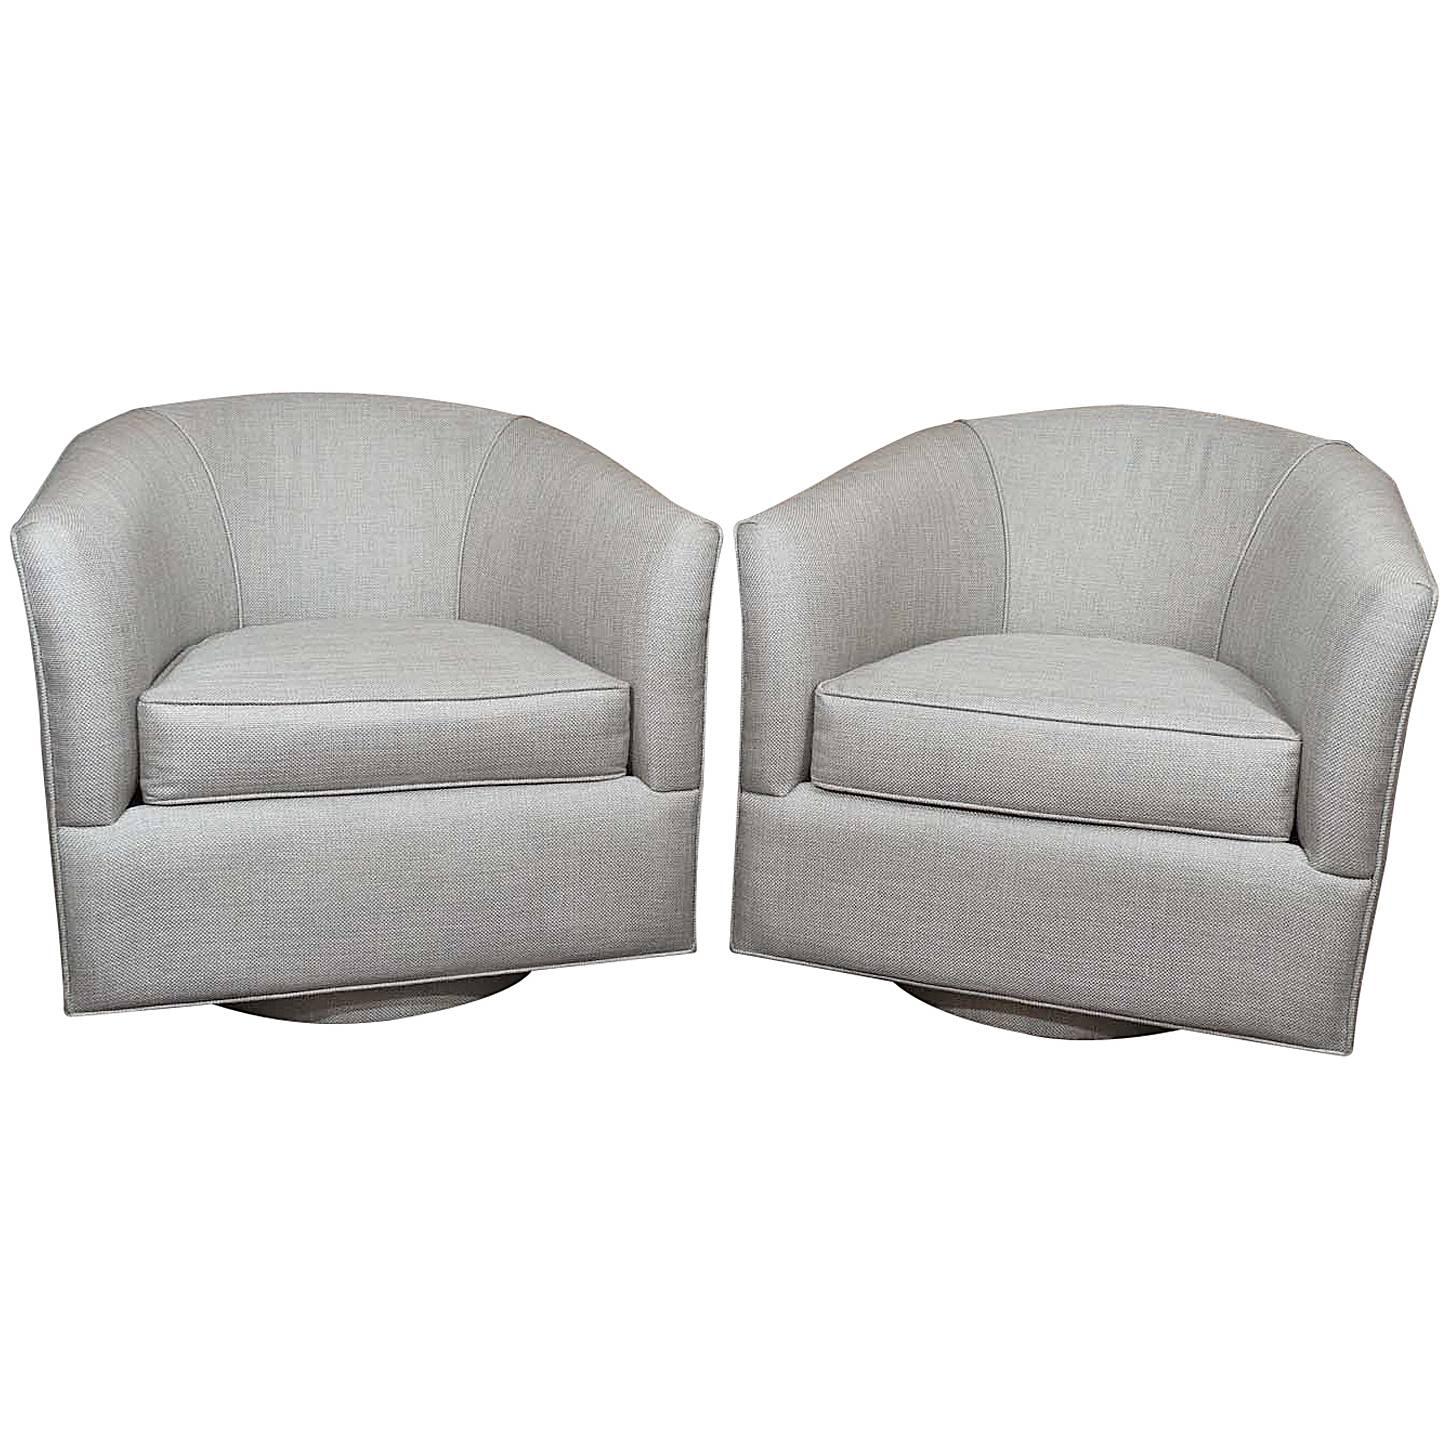 Pair of Vintage Chairs Upholstered in a Beautiful Grey Belgian Linen